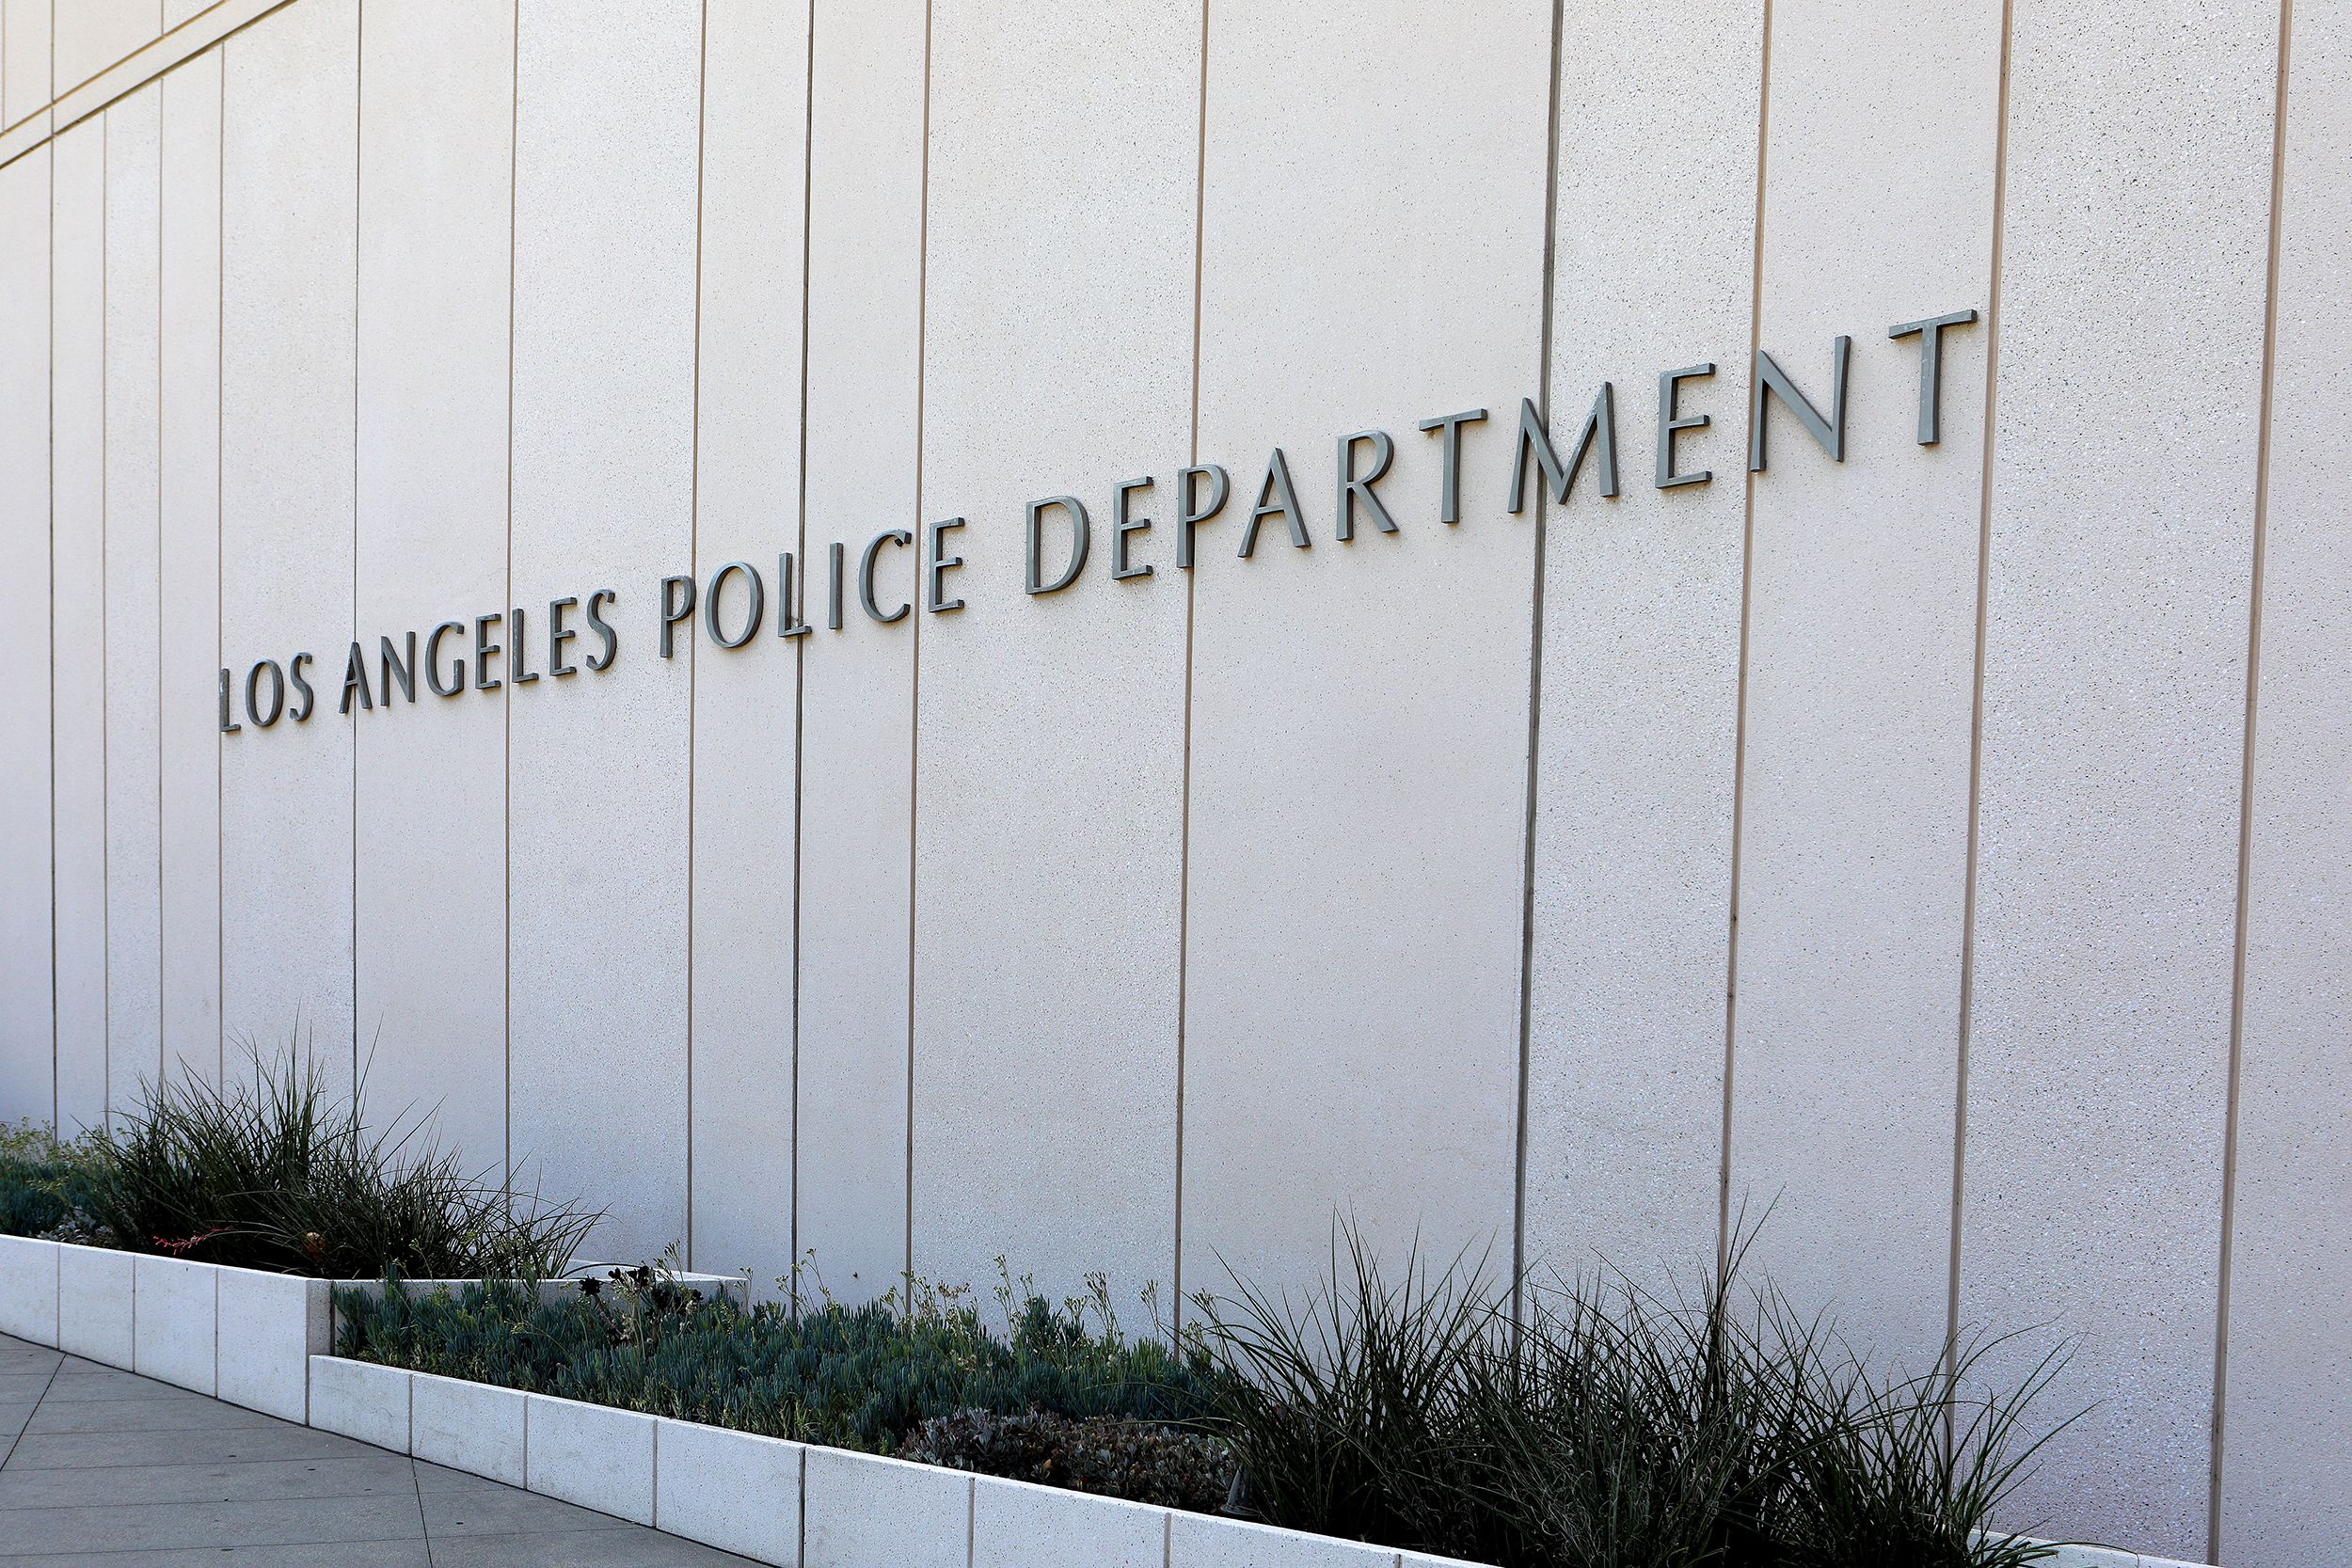 Three LAPD officers face felony charges for falsely labeling people as gang members